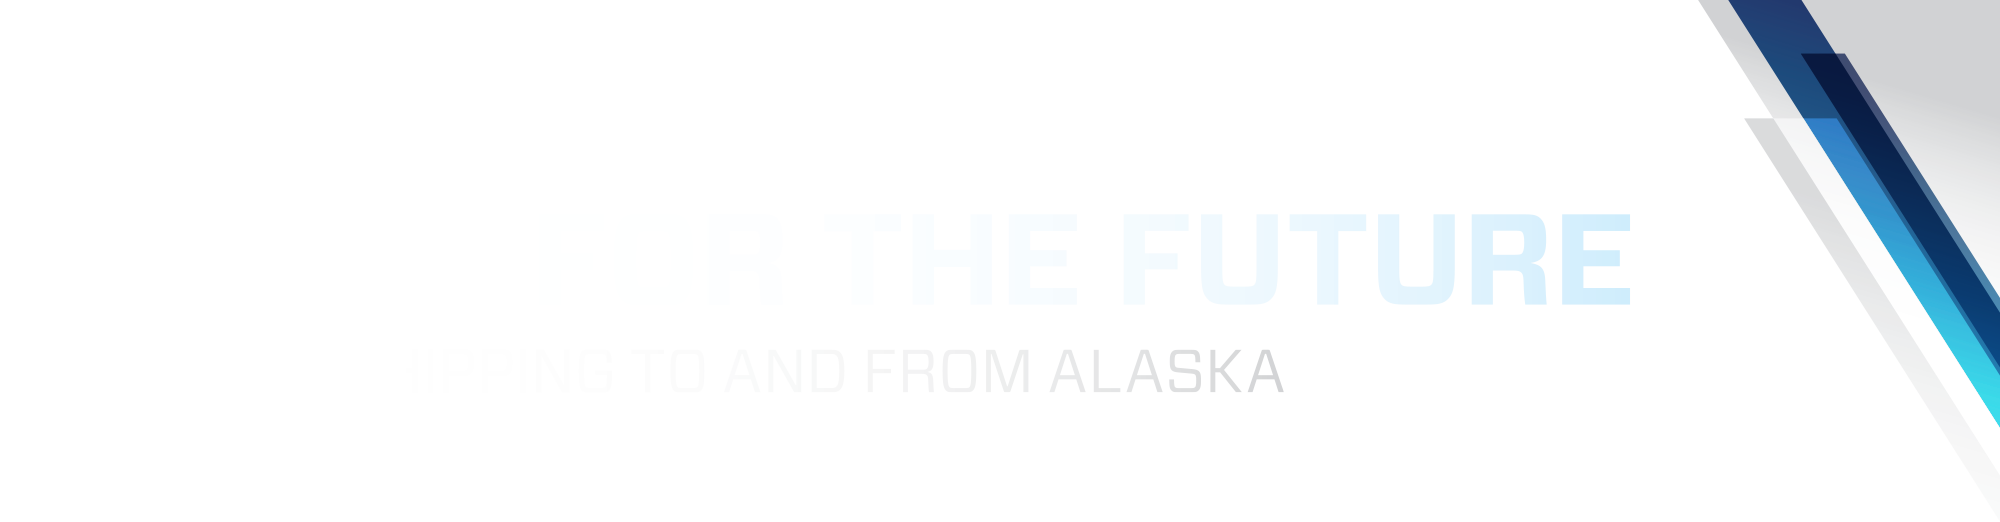 FUELED FOR THE FUTURE - dedicated SHIPPING TO AND FROM alaska